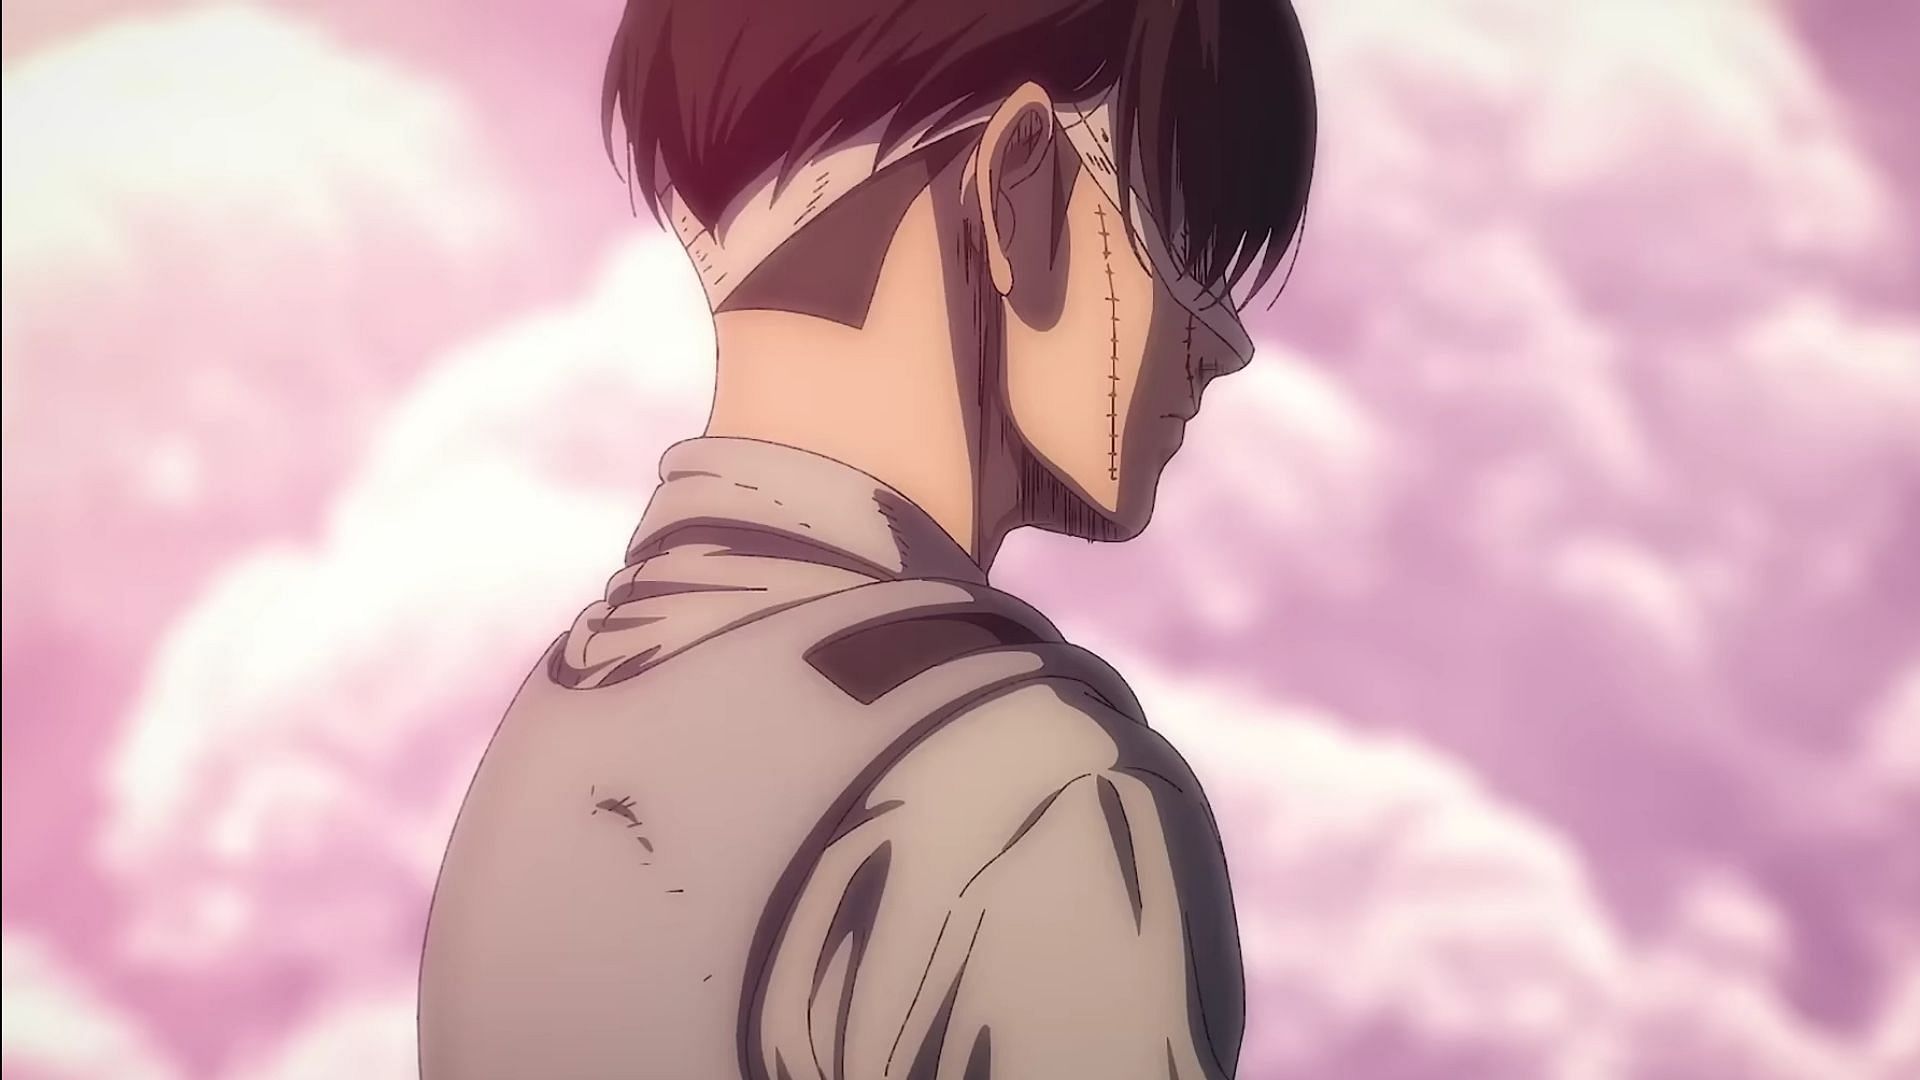 Levi&#039;s bandaged face and drooping shoulders as he faces away convey that life can take down even humanity&#039;s strongest soldier (Image via Studio MAPPA)